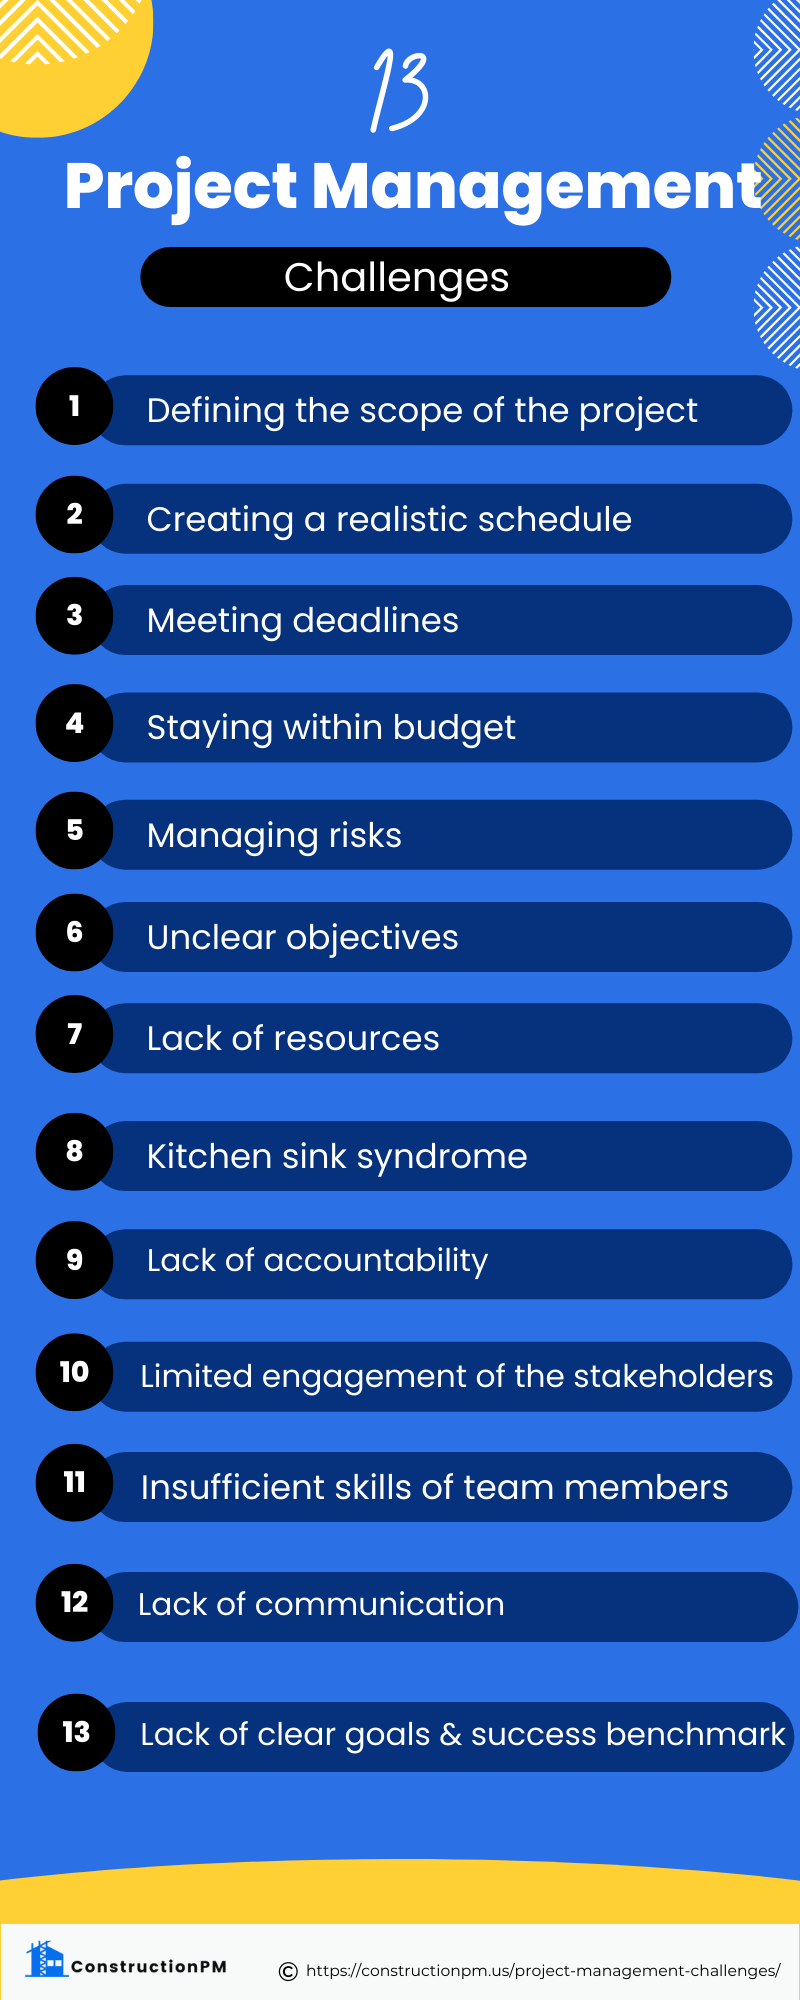 13 Project Management Challenges Tips and Strategies Infographic